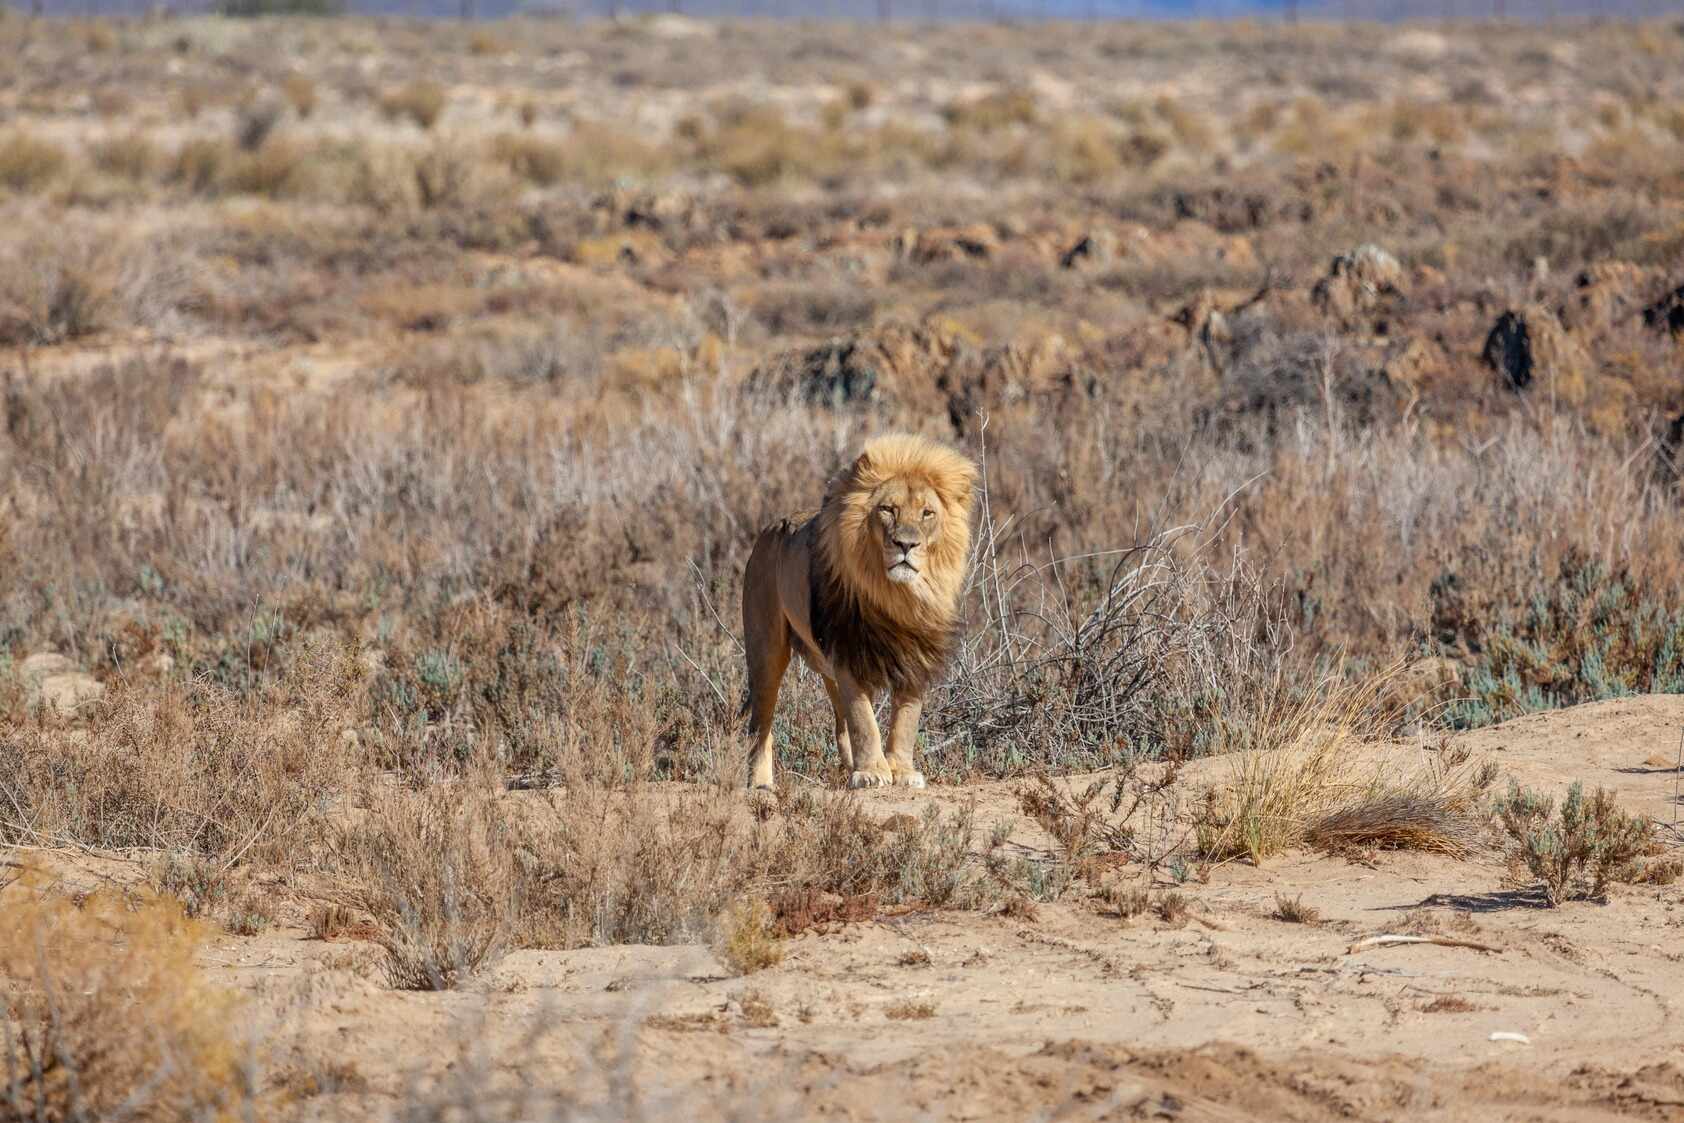 Inverdoorn Big 5 Karoo Safari Booking Guide: Male lion standing in the middle of the Karoo veld and facing the camera